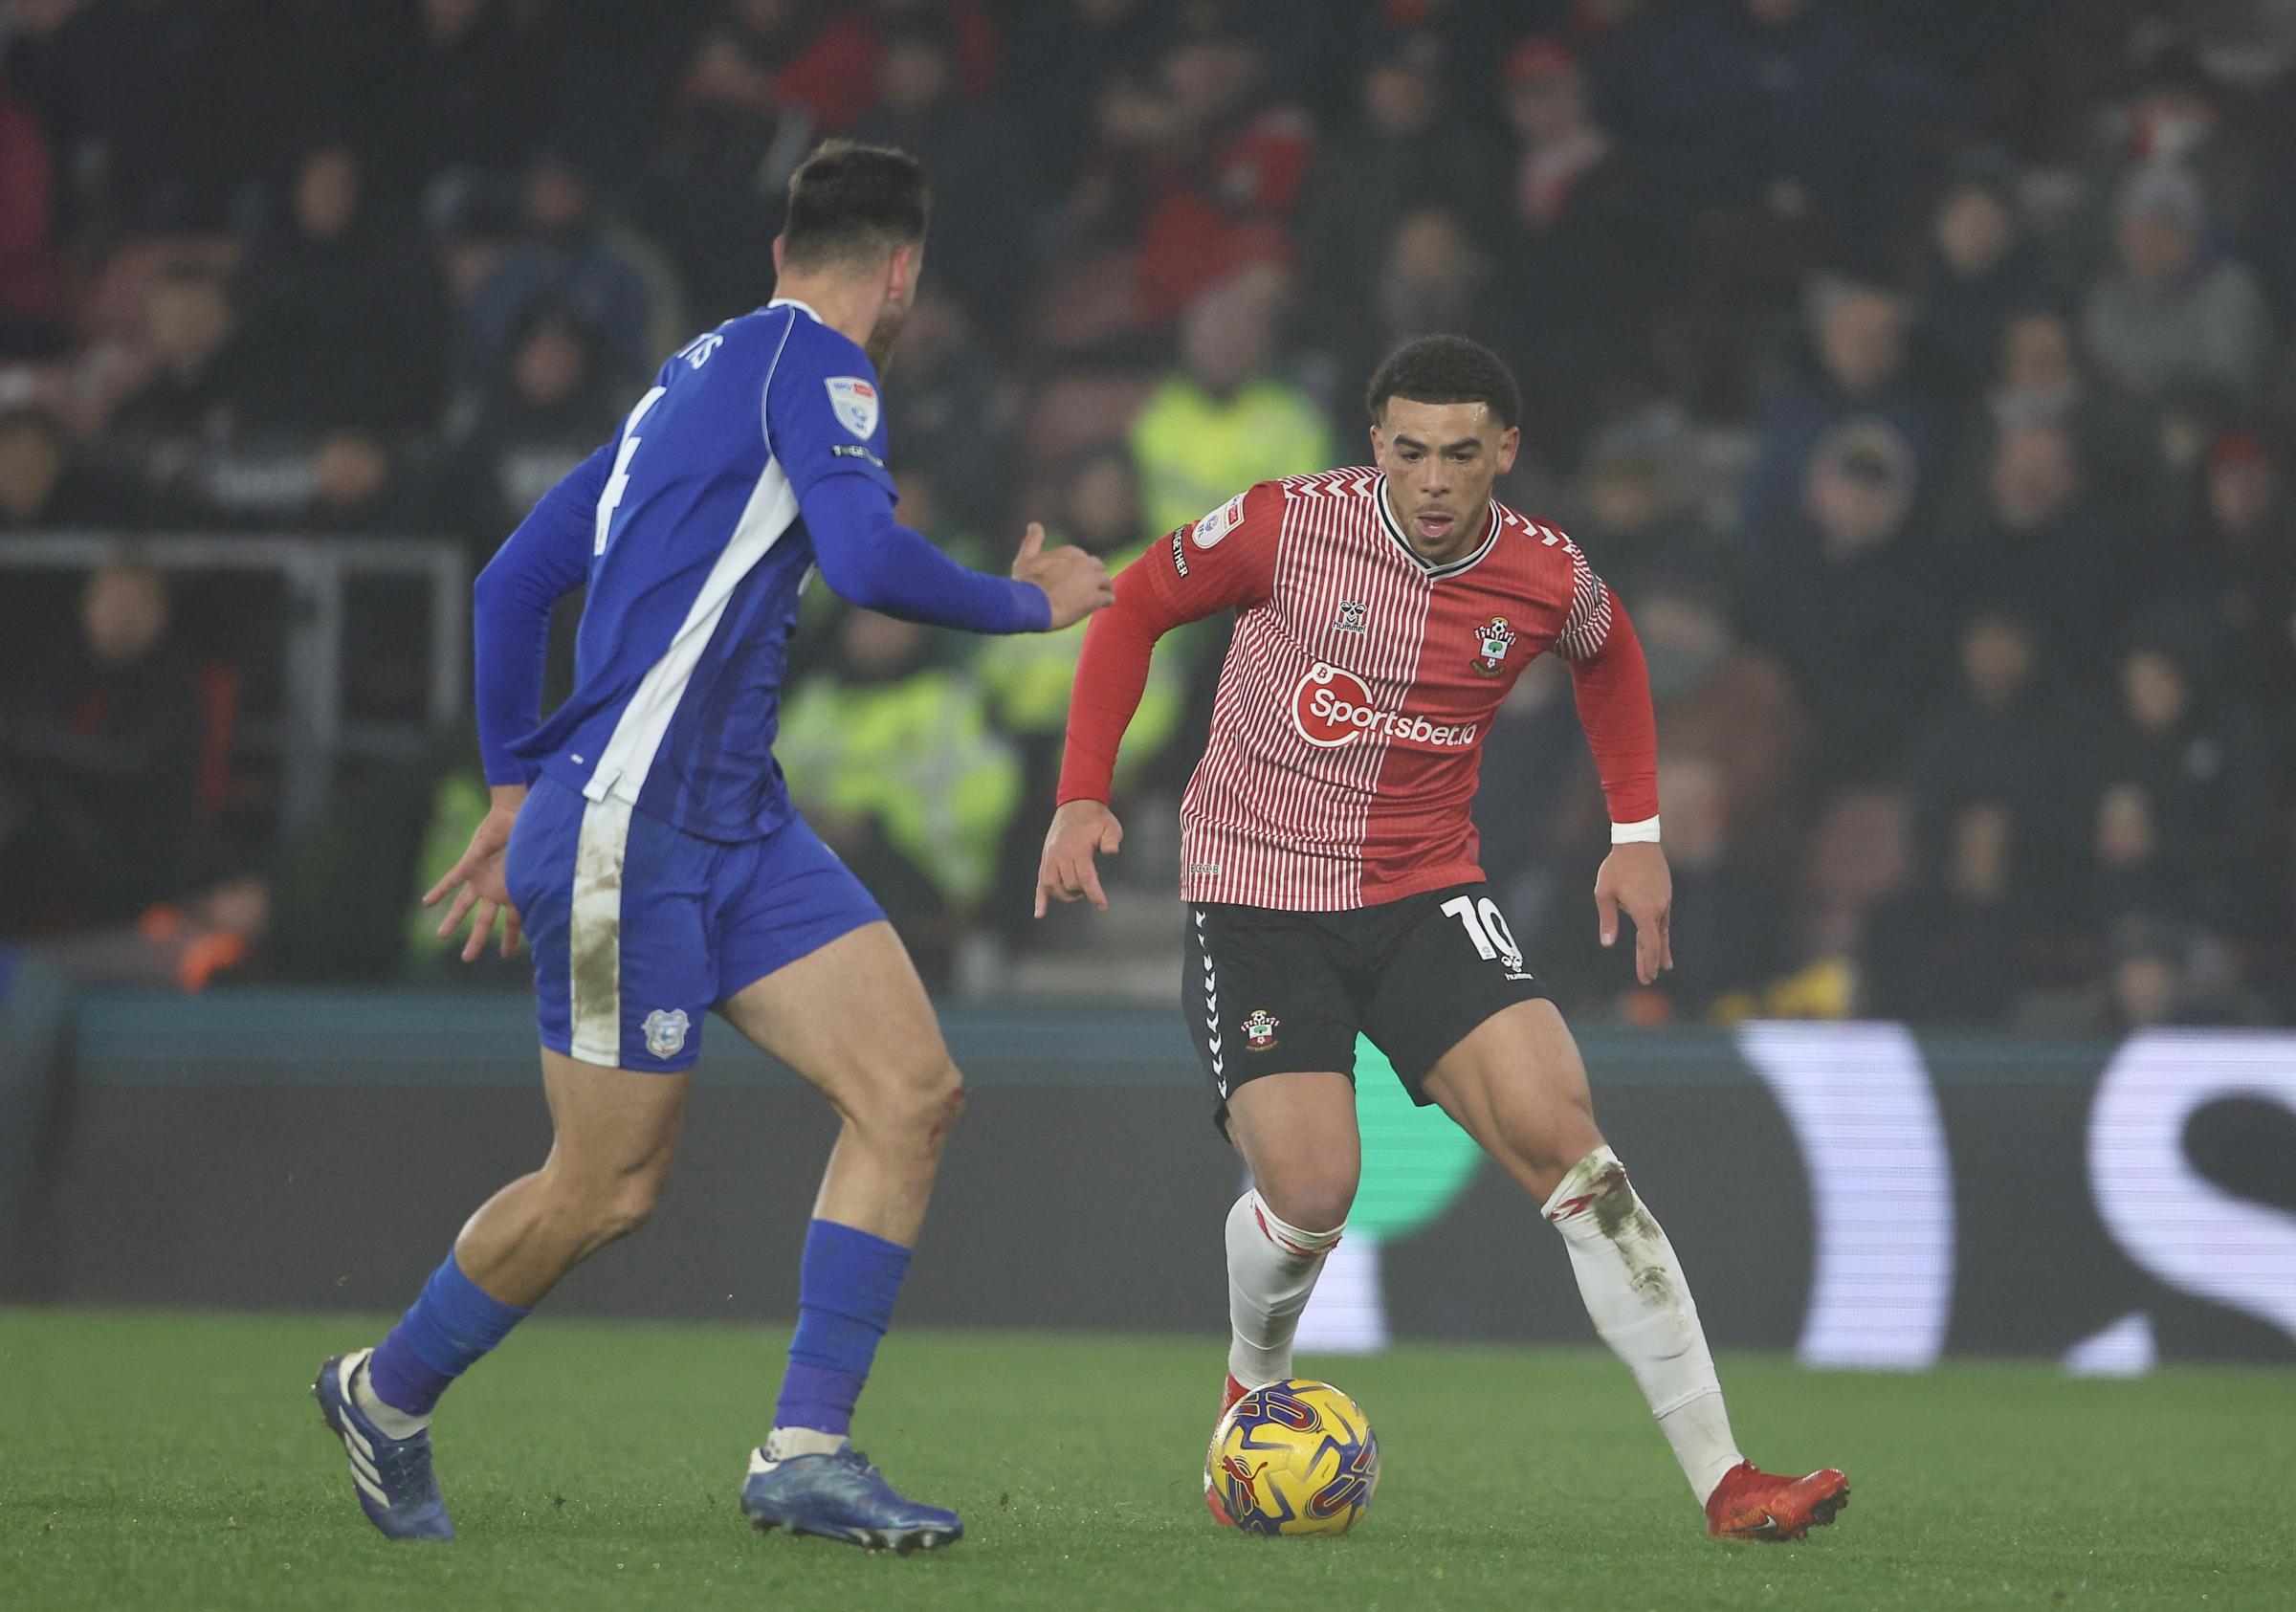 How to watch, stream or follow Cardiff City vs Southampton FC